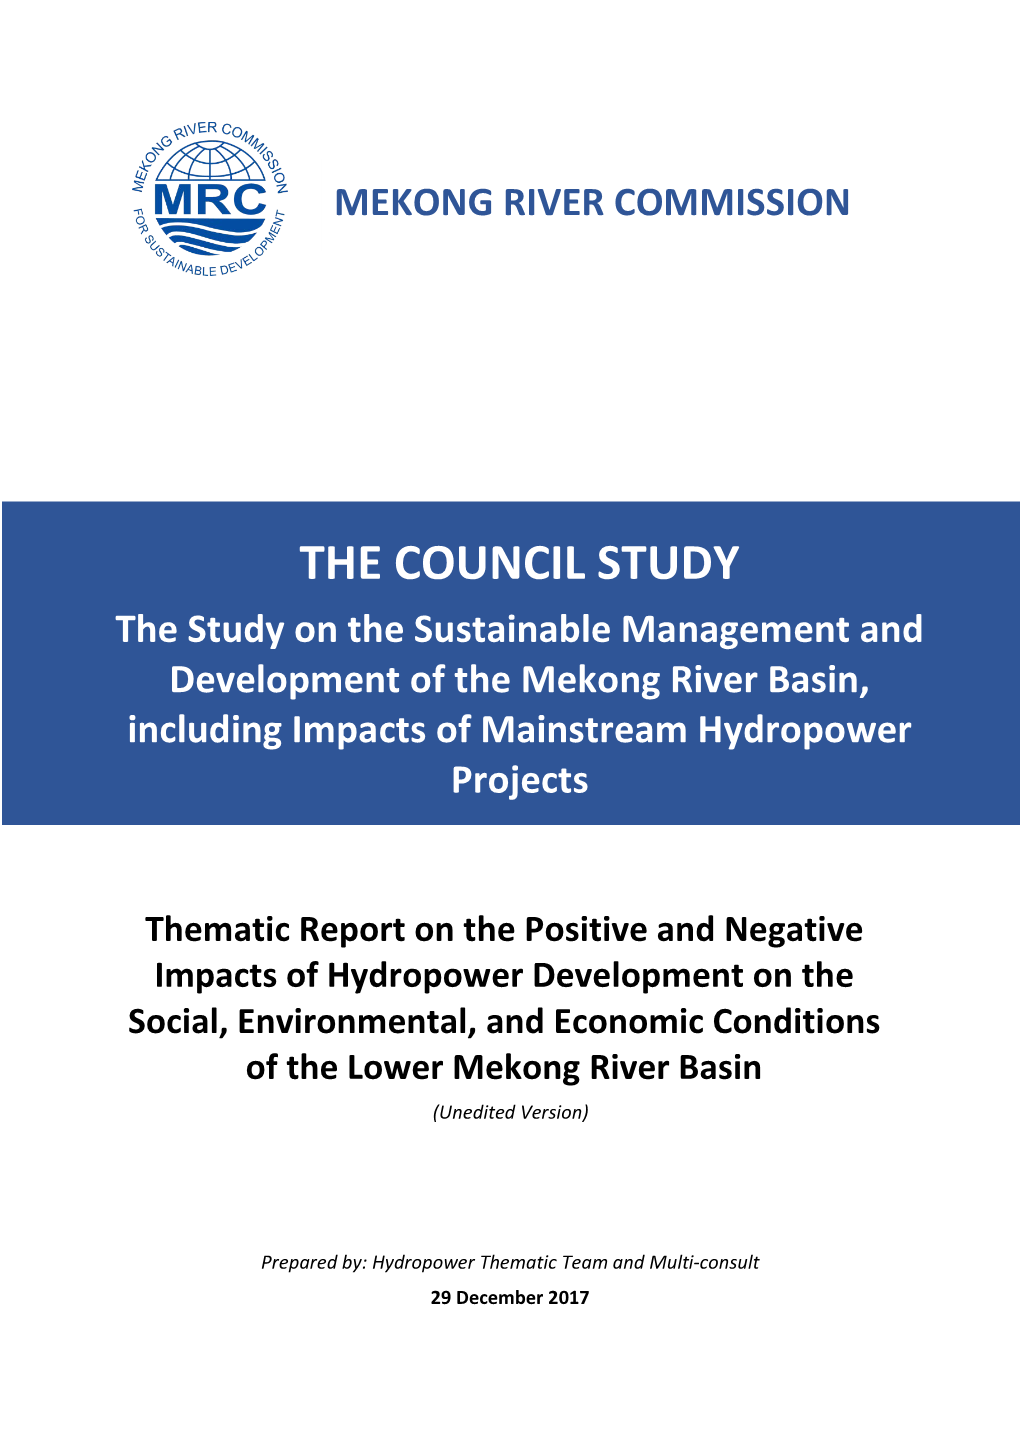 Hydropower Development on the Social, Environmental, and Economic Conditions of the Lower Mekong River Basin (Unedited Version)